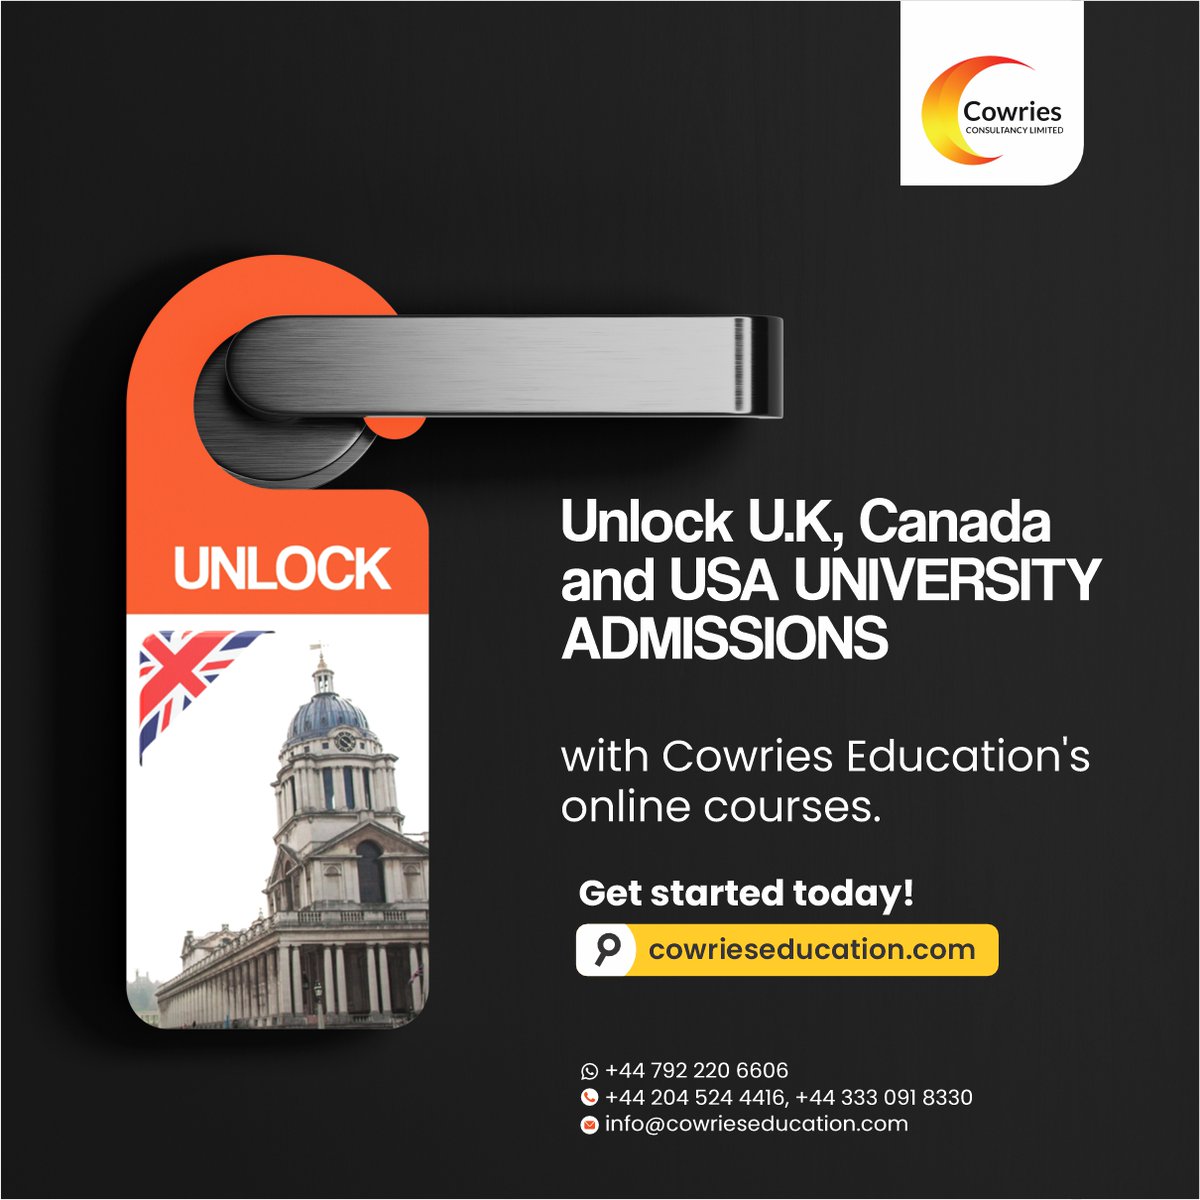 With Cowries Education, diving into online courses opens doors to university admissions and work permits across the globe. To get started, visit cowrieseducation.com #UnlockYourFuture #GlobalEducation #UniversityAdmissions #WorkPermits #OnlineCourses #StudyAbroad #CareerGrowth